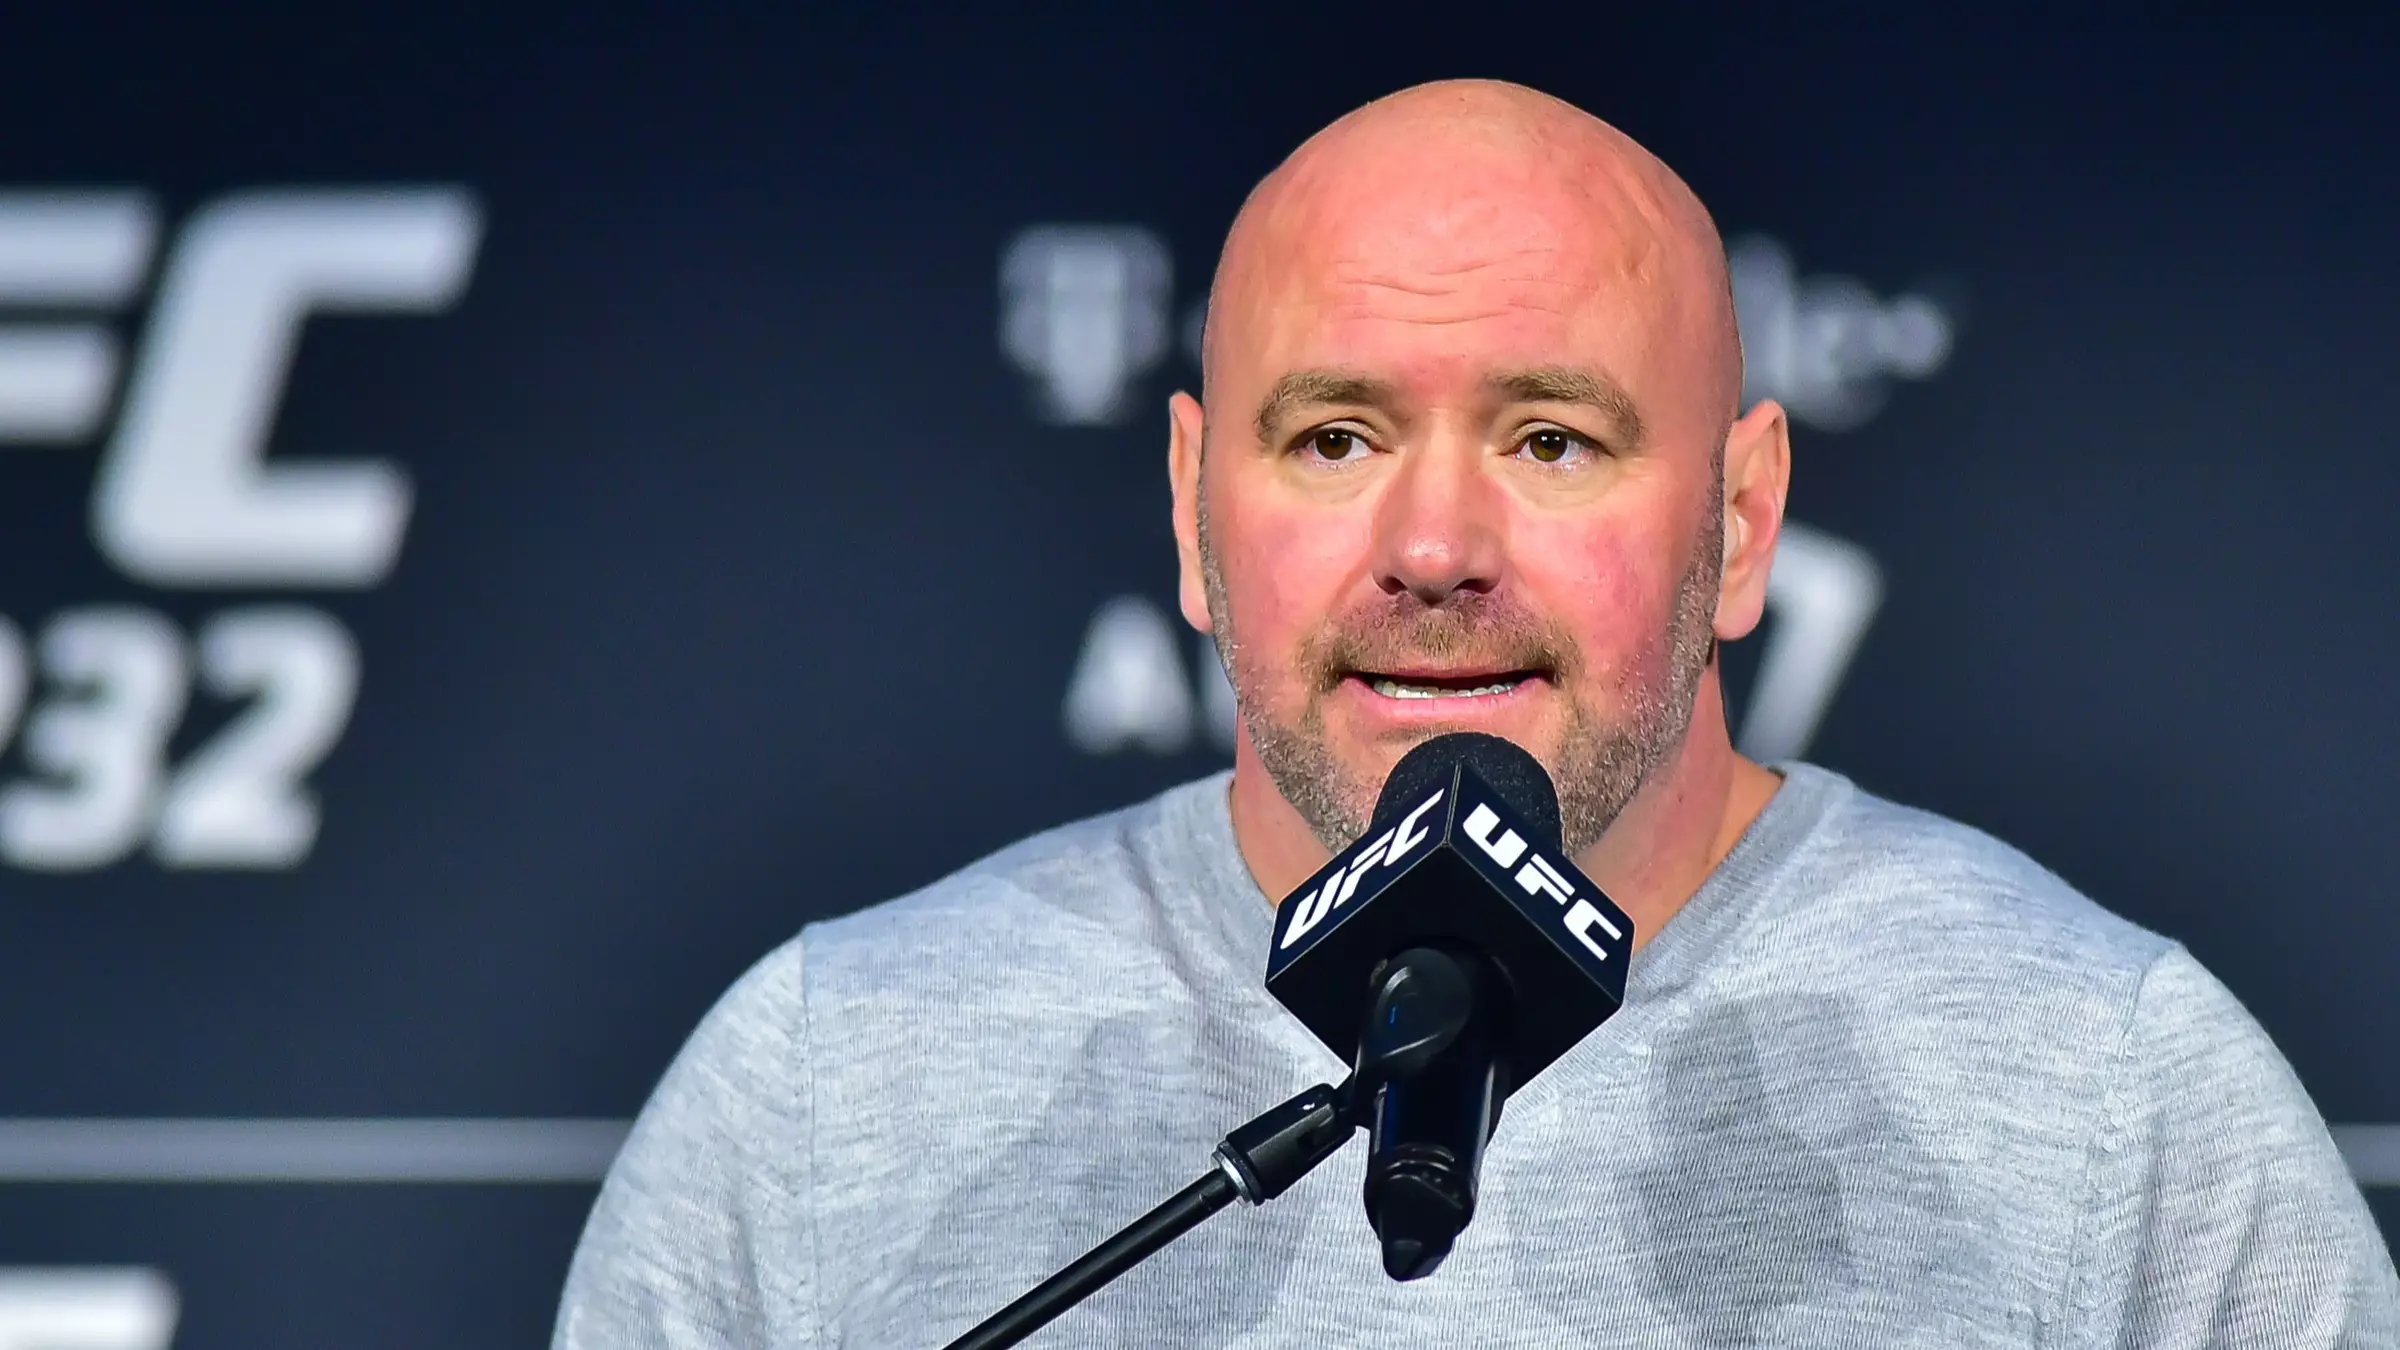 Dana White Responds To Video Showing 'Conor McGregor' Punching Older Man